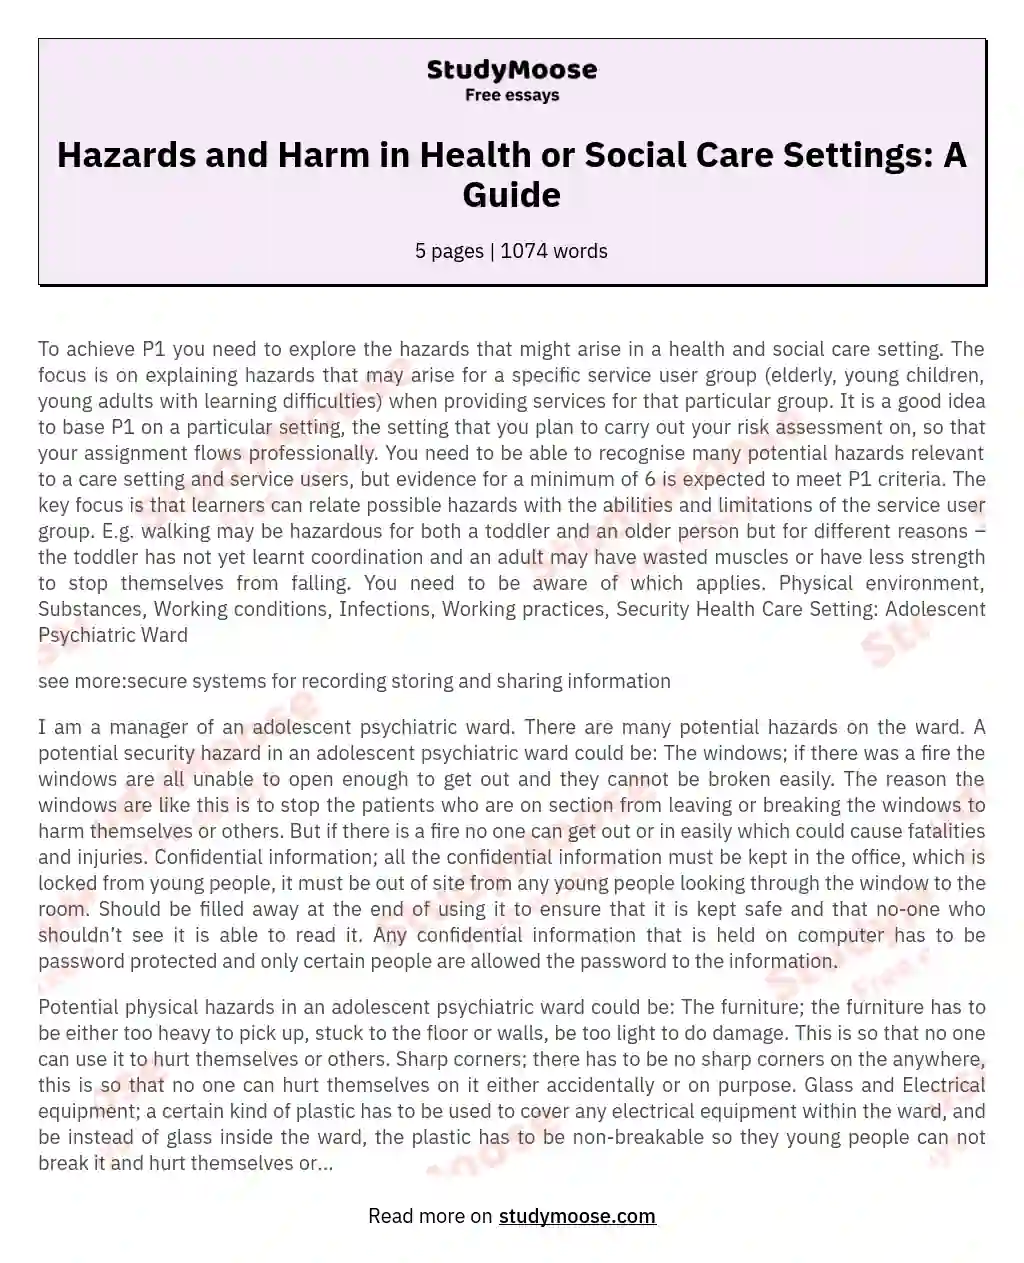 Explain Potential Hazards And The Harm That May Arise From Each In A Health Or Social Care Setting